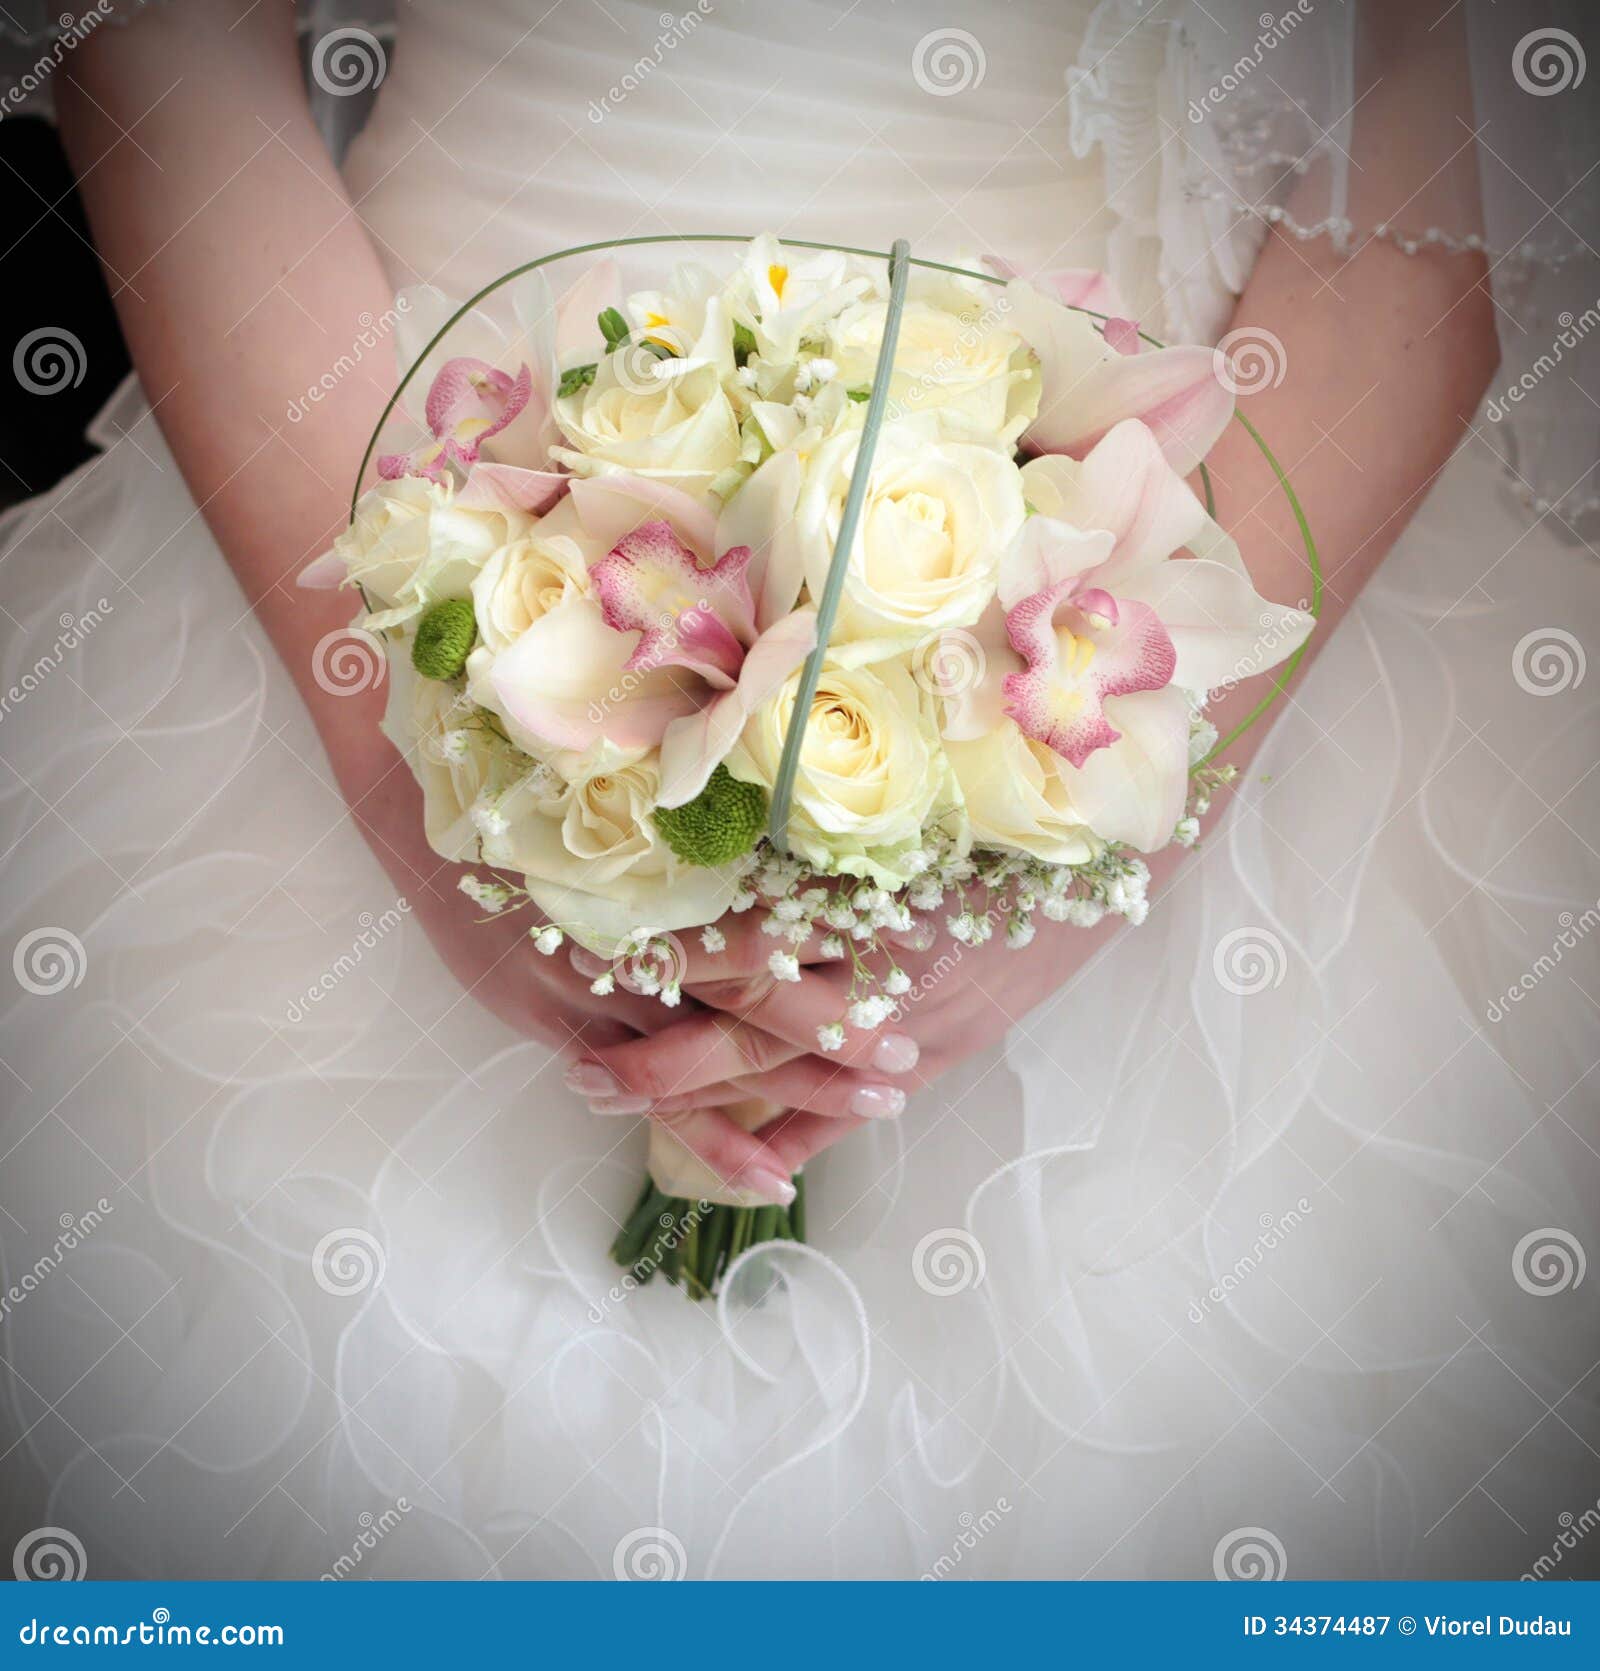 Wedding flowers stock image. Image of married, detail - 34374487